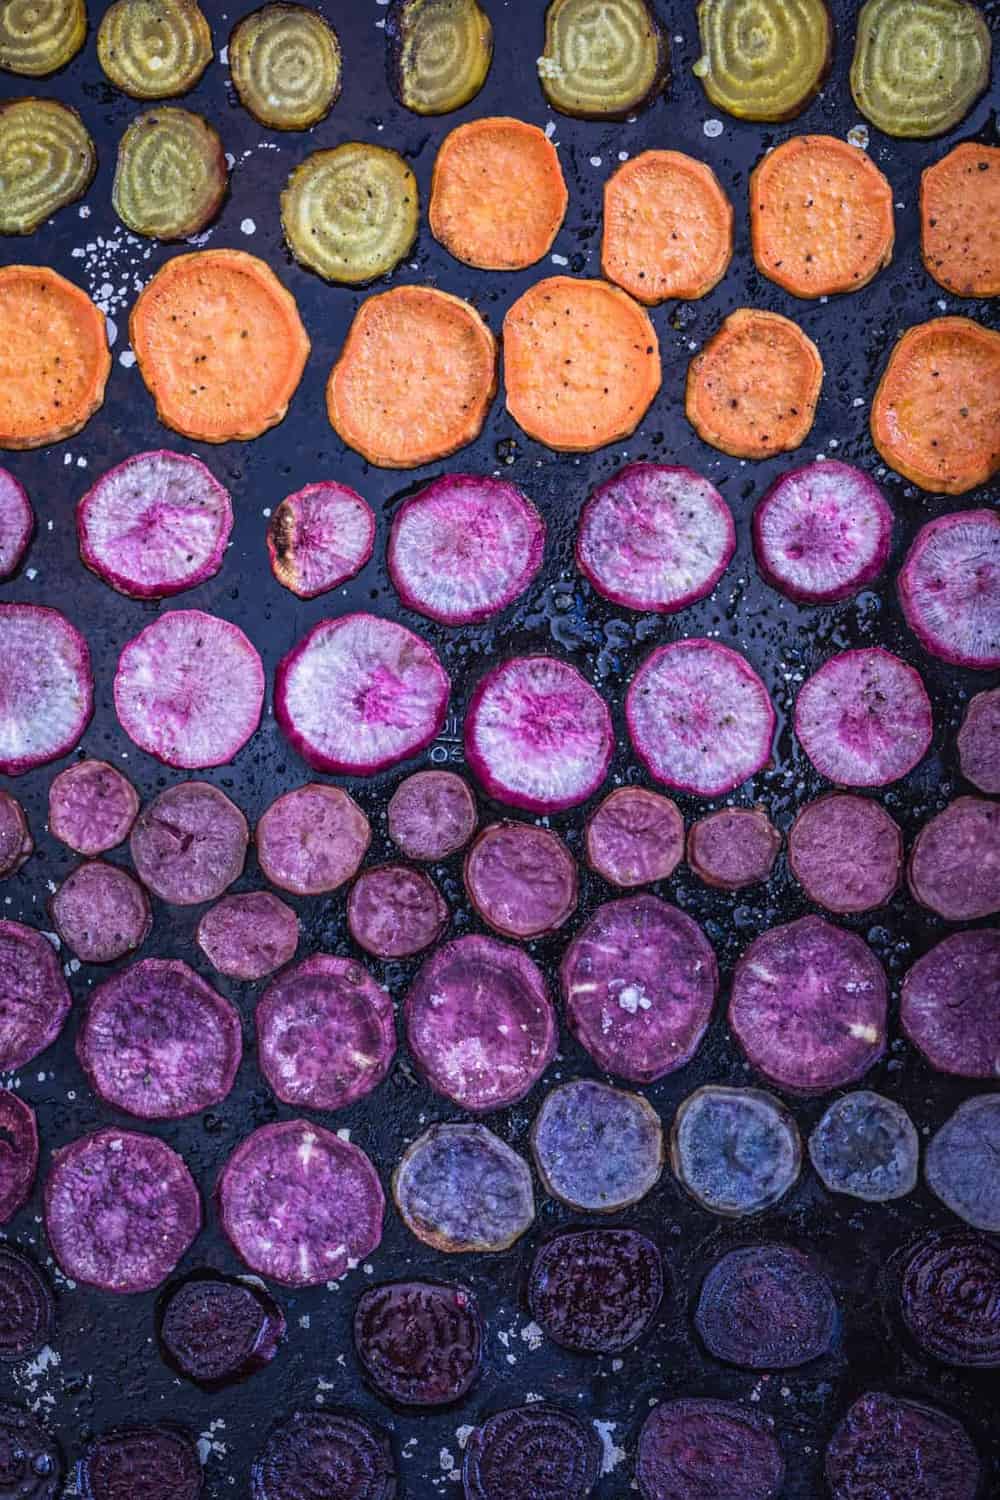 Rainbow Root Veggies in yellow, orange, pink, purple and deep red all sliced up and post oven shot.